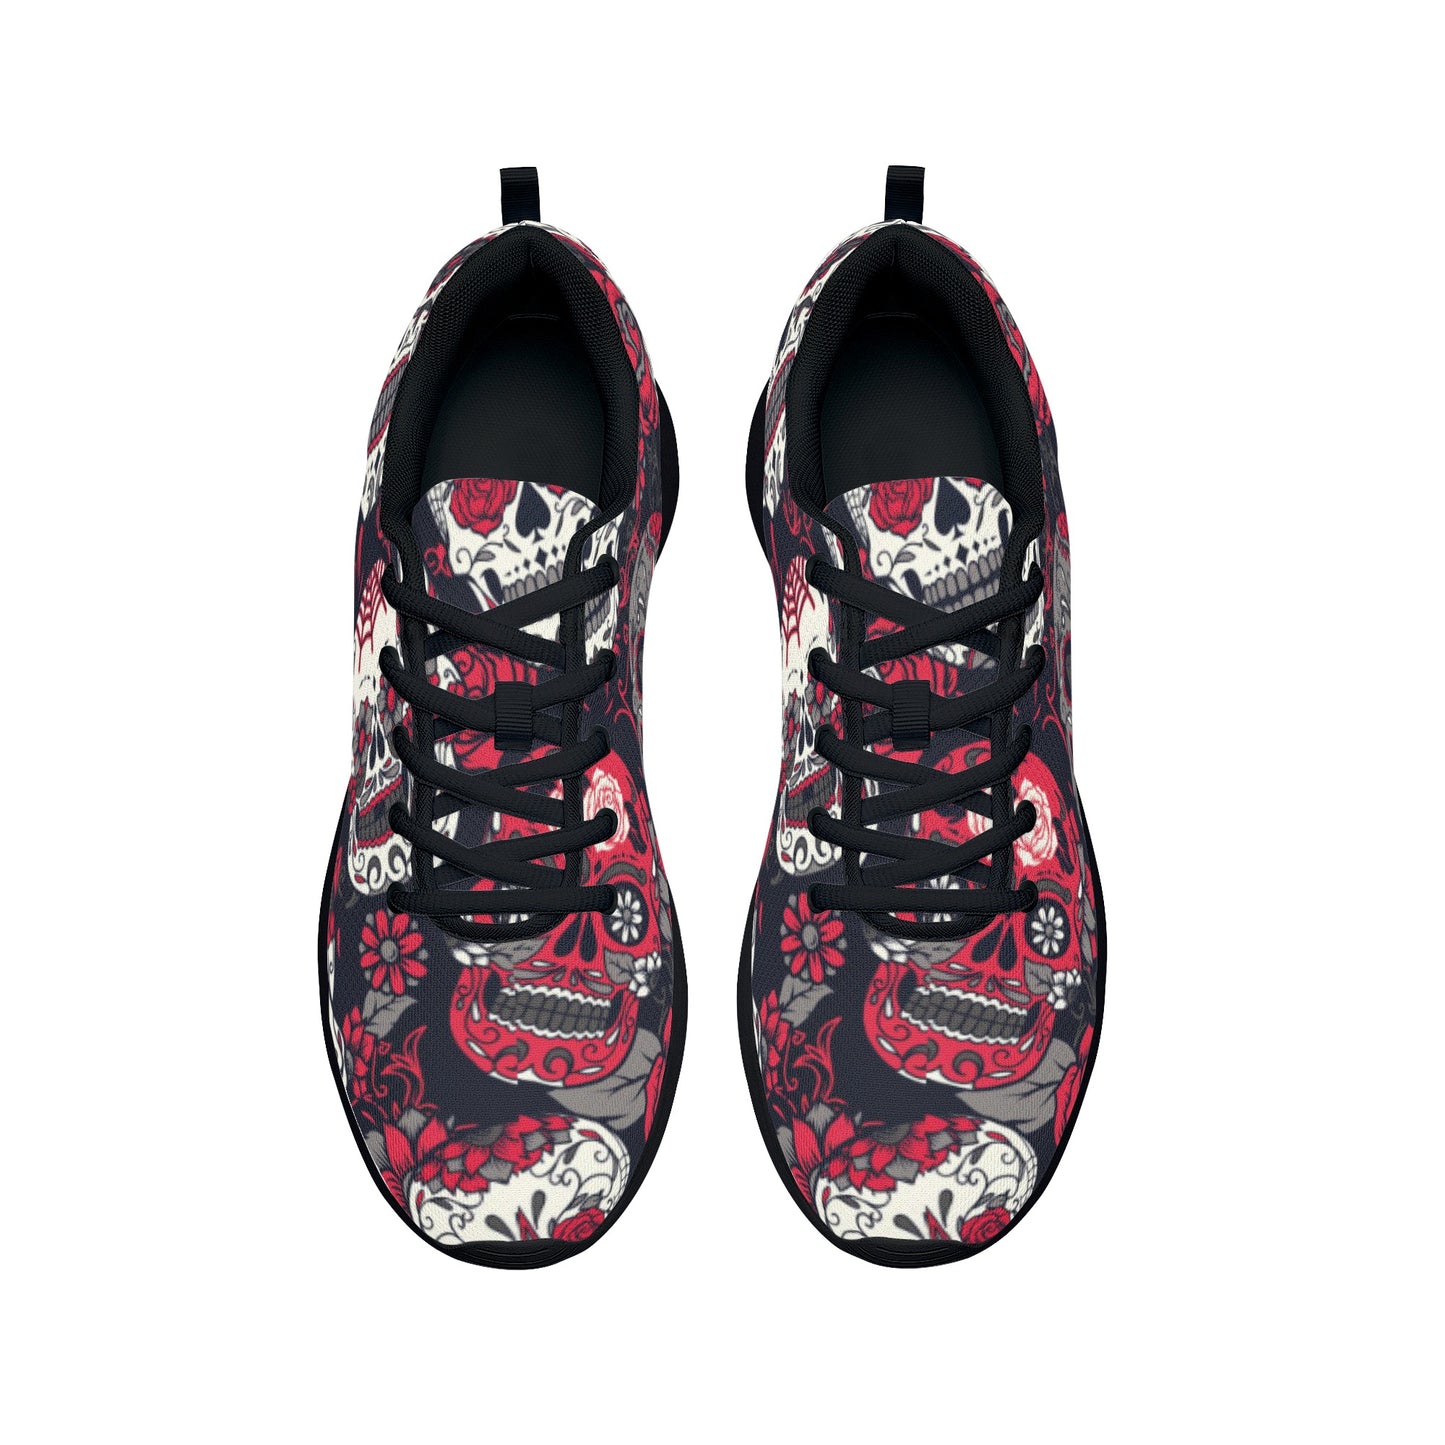 Day of the dead sugar skull Women's Mesh Athletic Sneakers